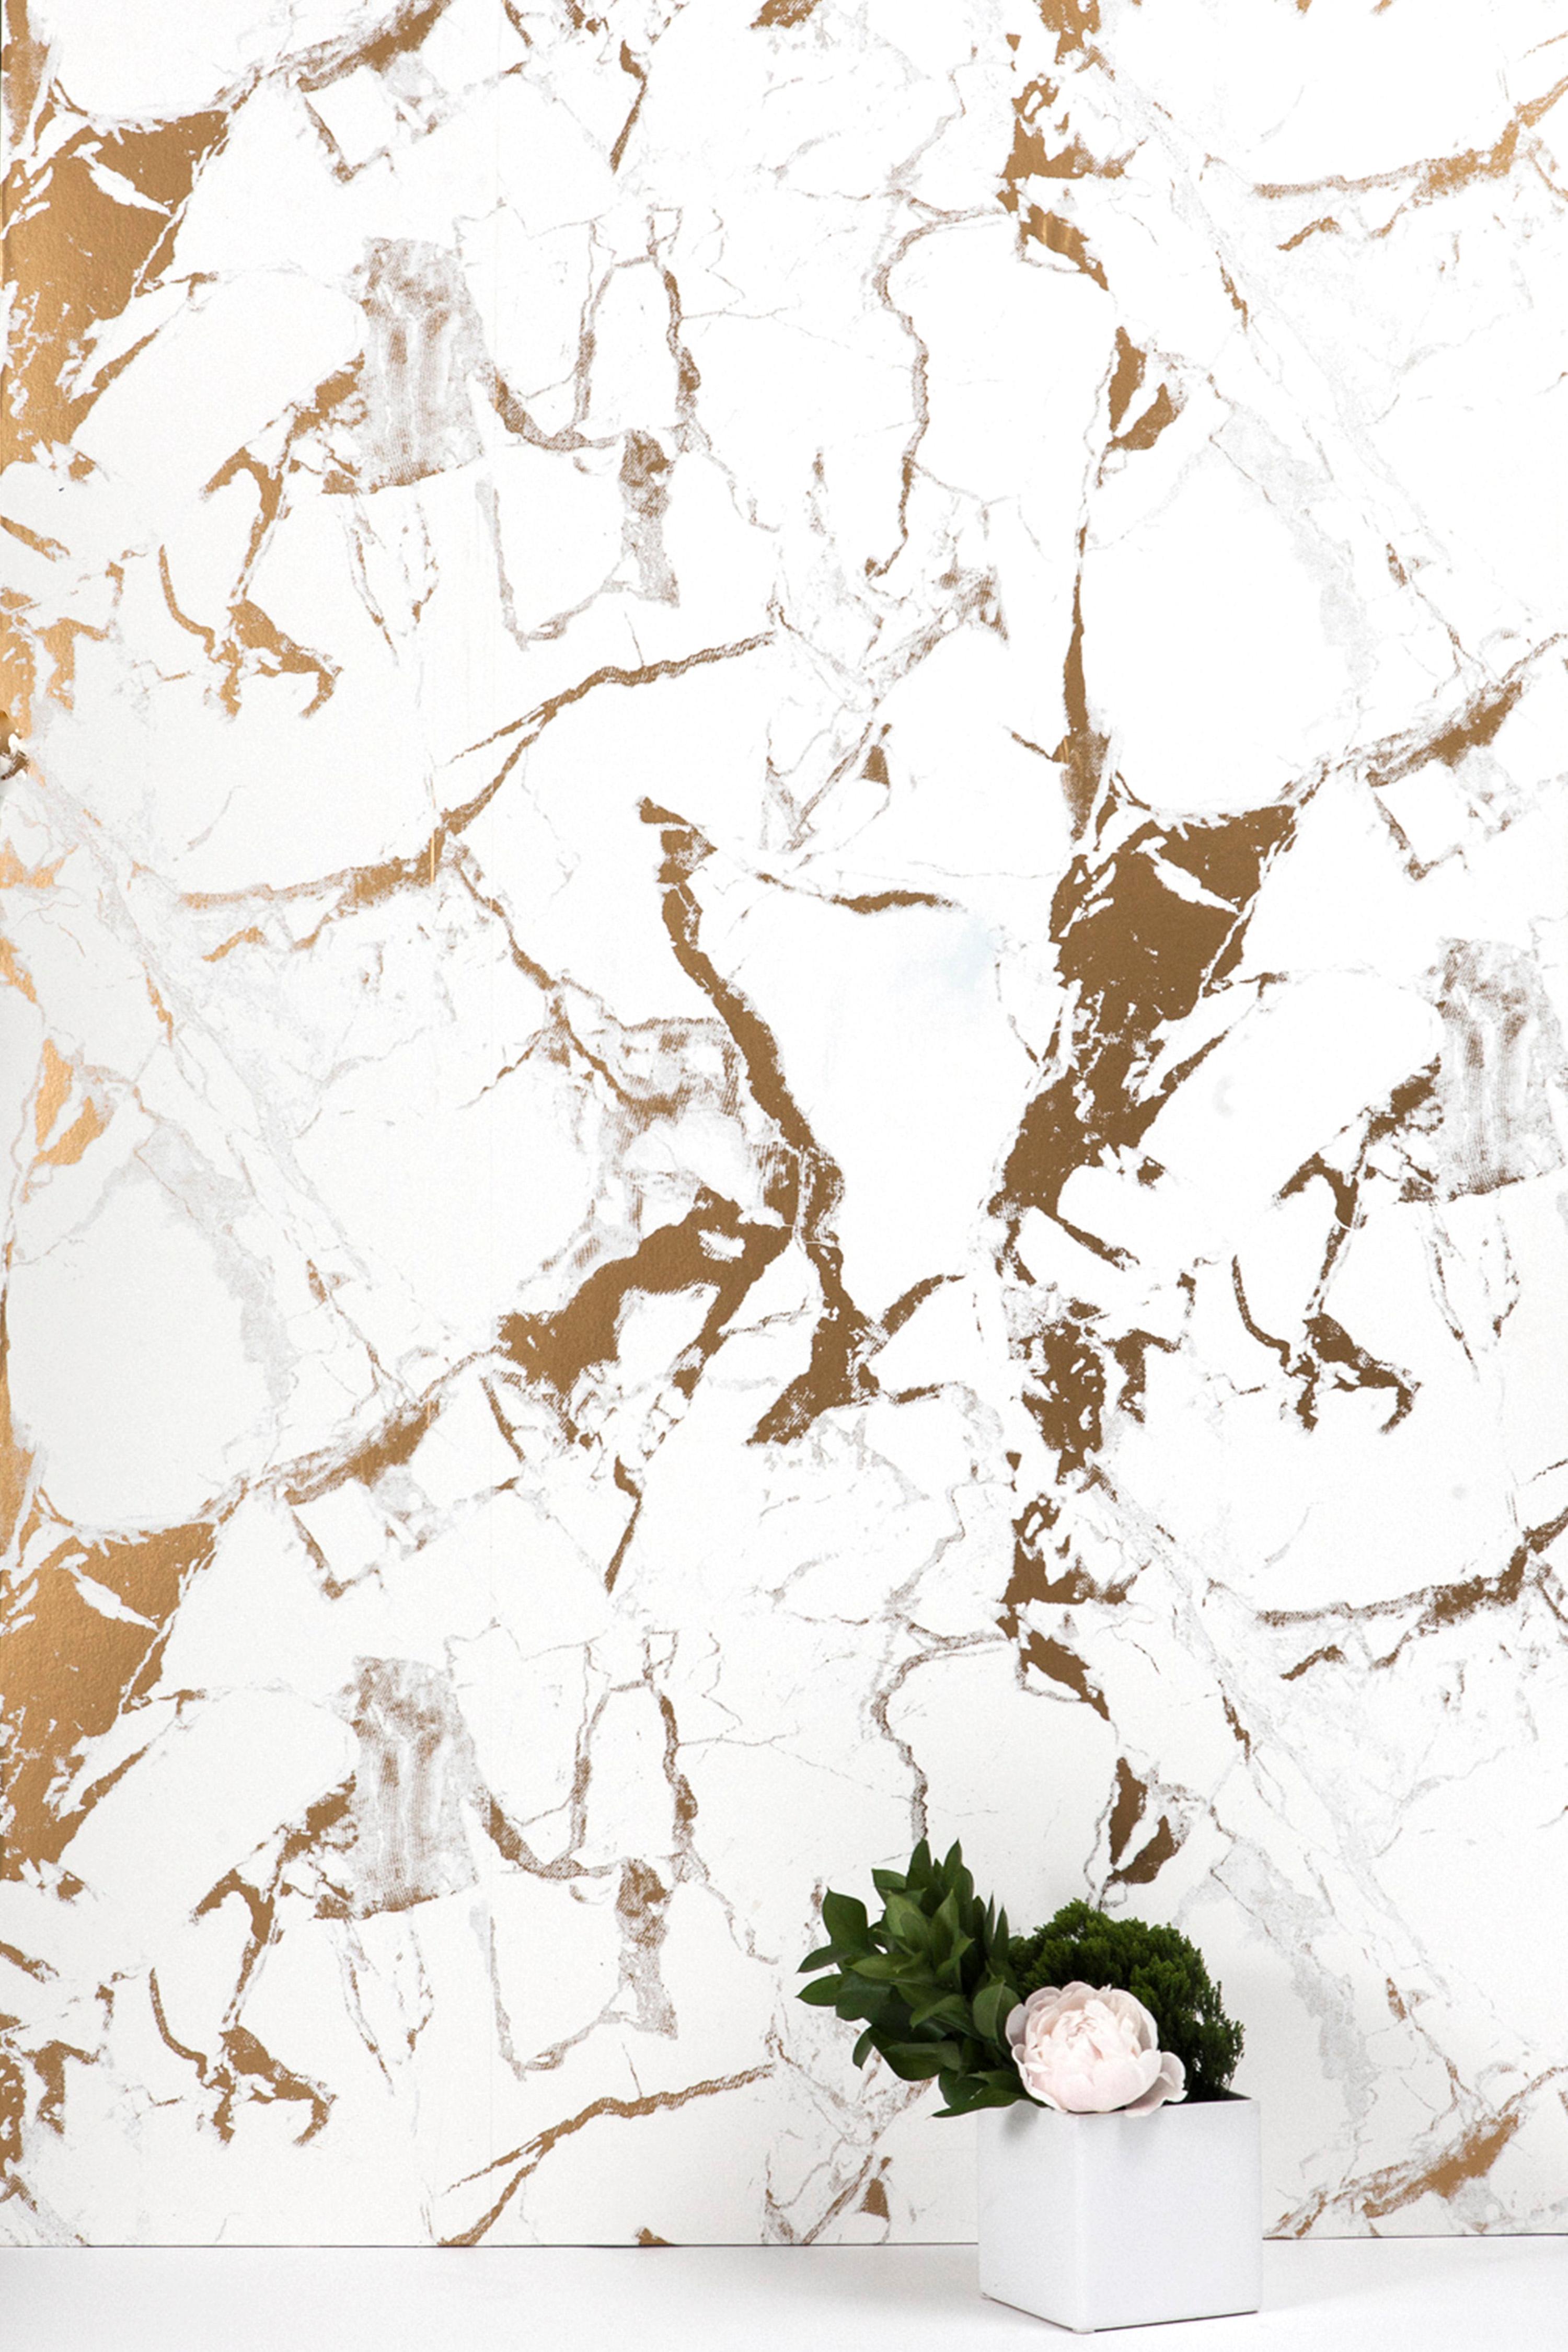 Bianco is a luxurious hand-printed marble pattern with warm bright white and metallic gold inks. It is also washable, strippable, unpasted, and Class A fire rated. Made in the USA.

Half drop match.
Measures: Vertical repeat 36”
Horizontal